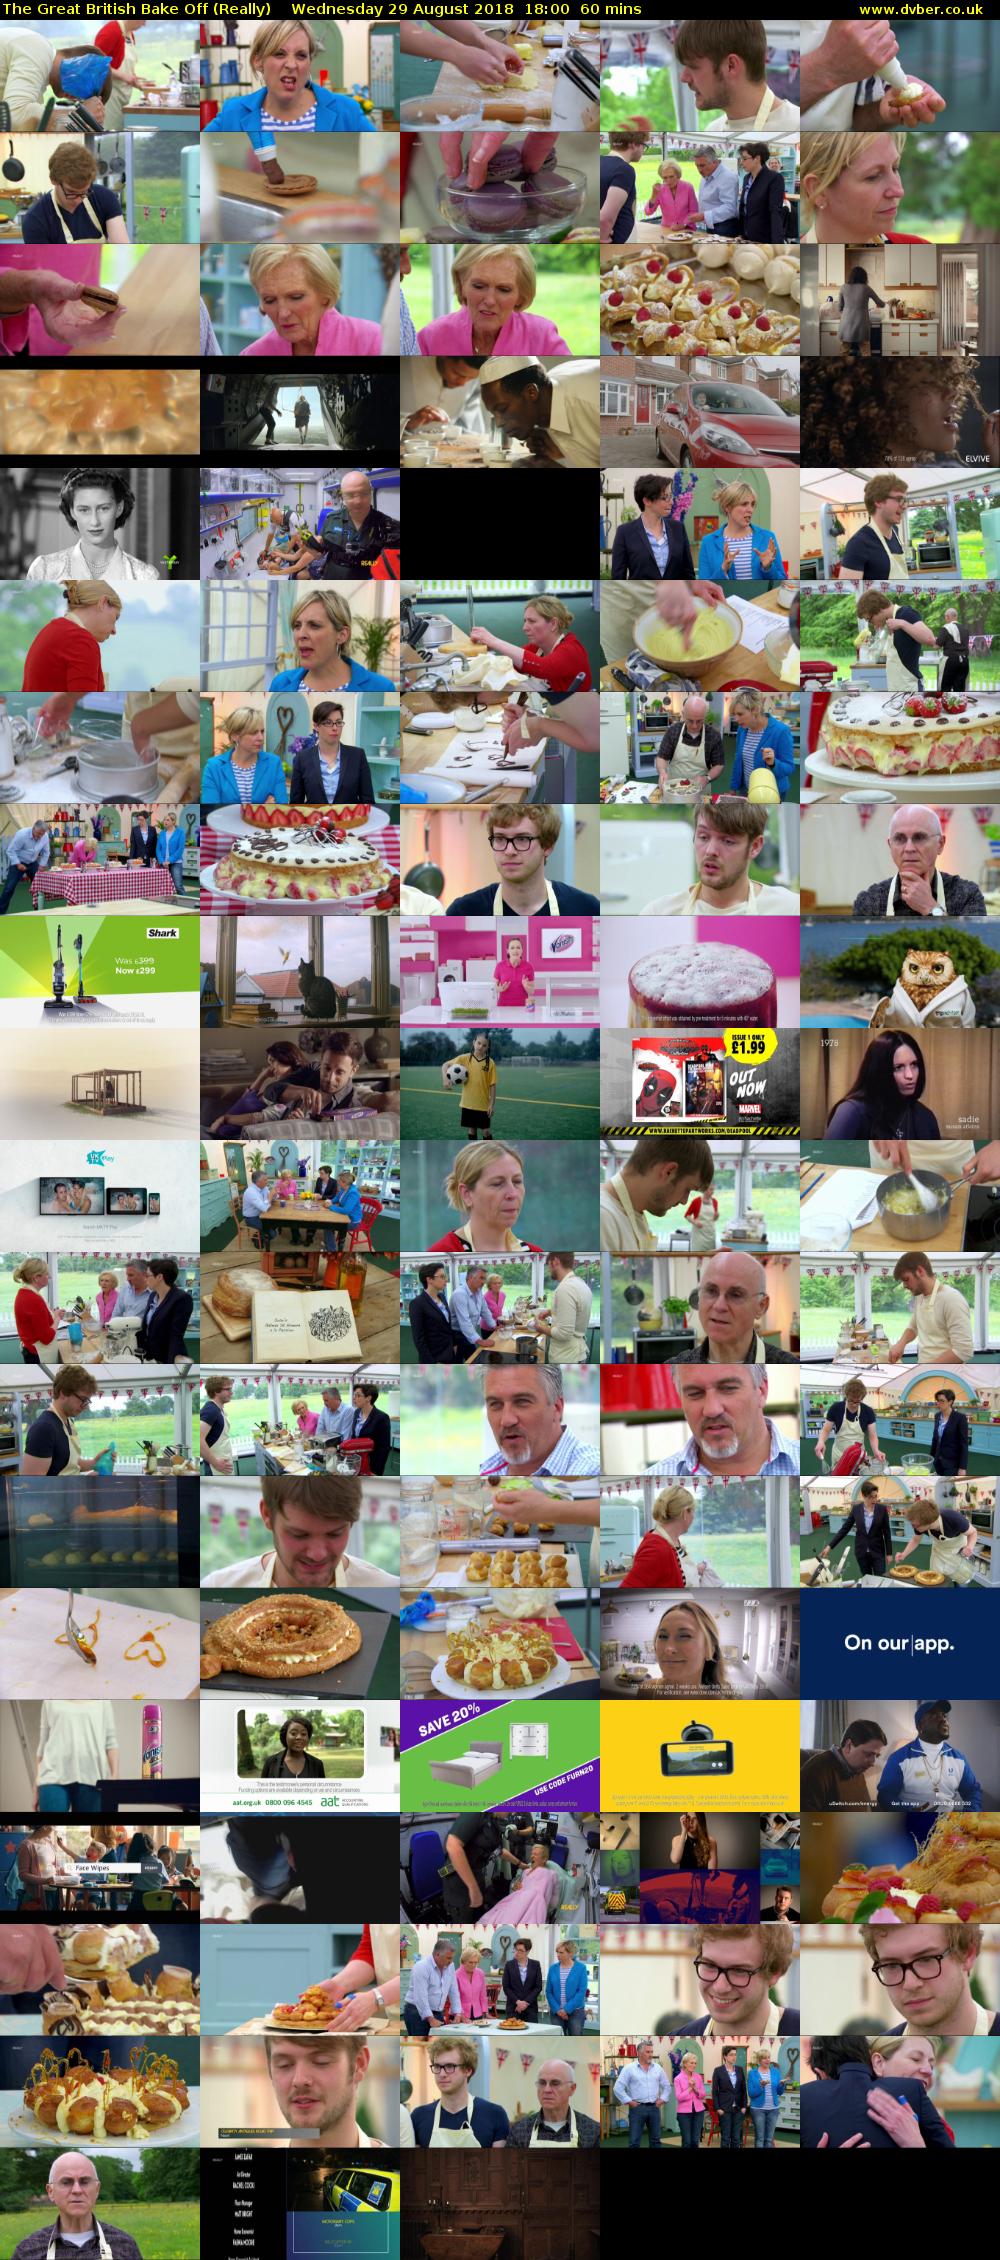 The Great British Bake Off (Really) Wednesday 29 August 2018 18:00 - 19:00